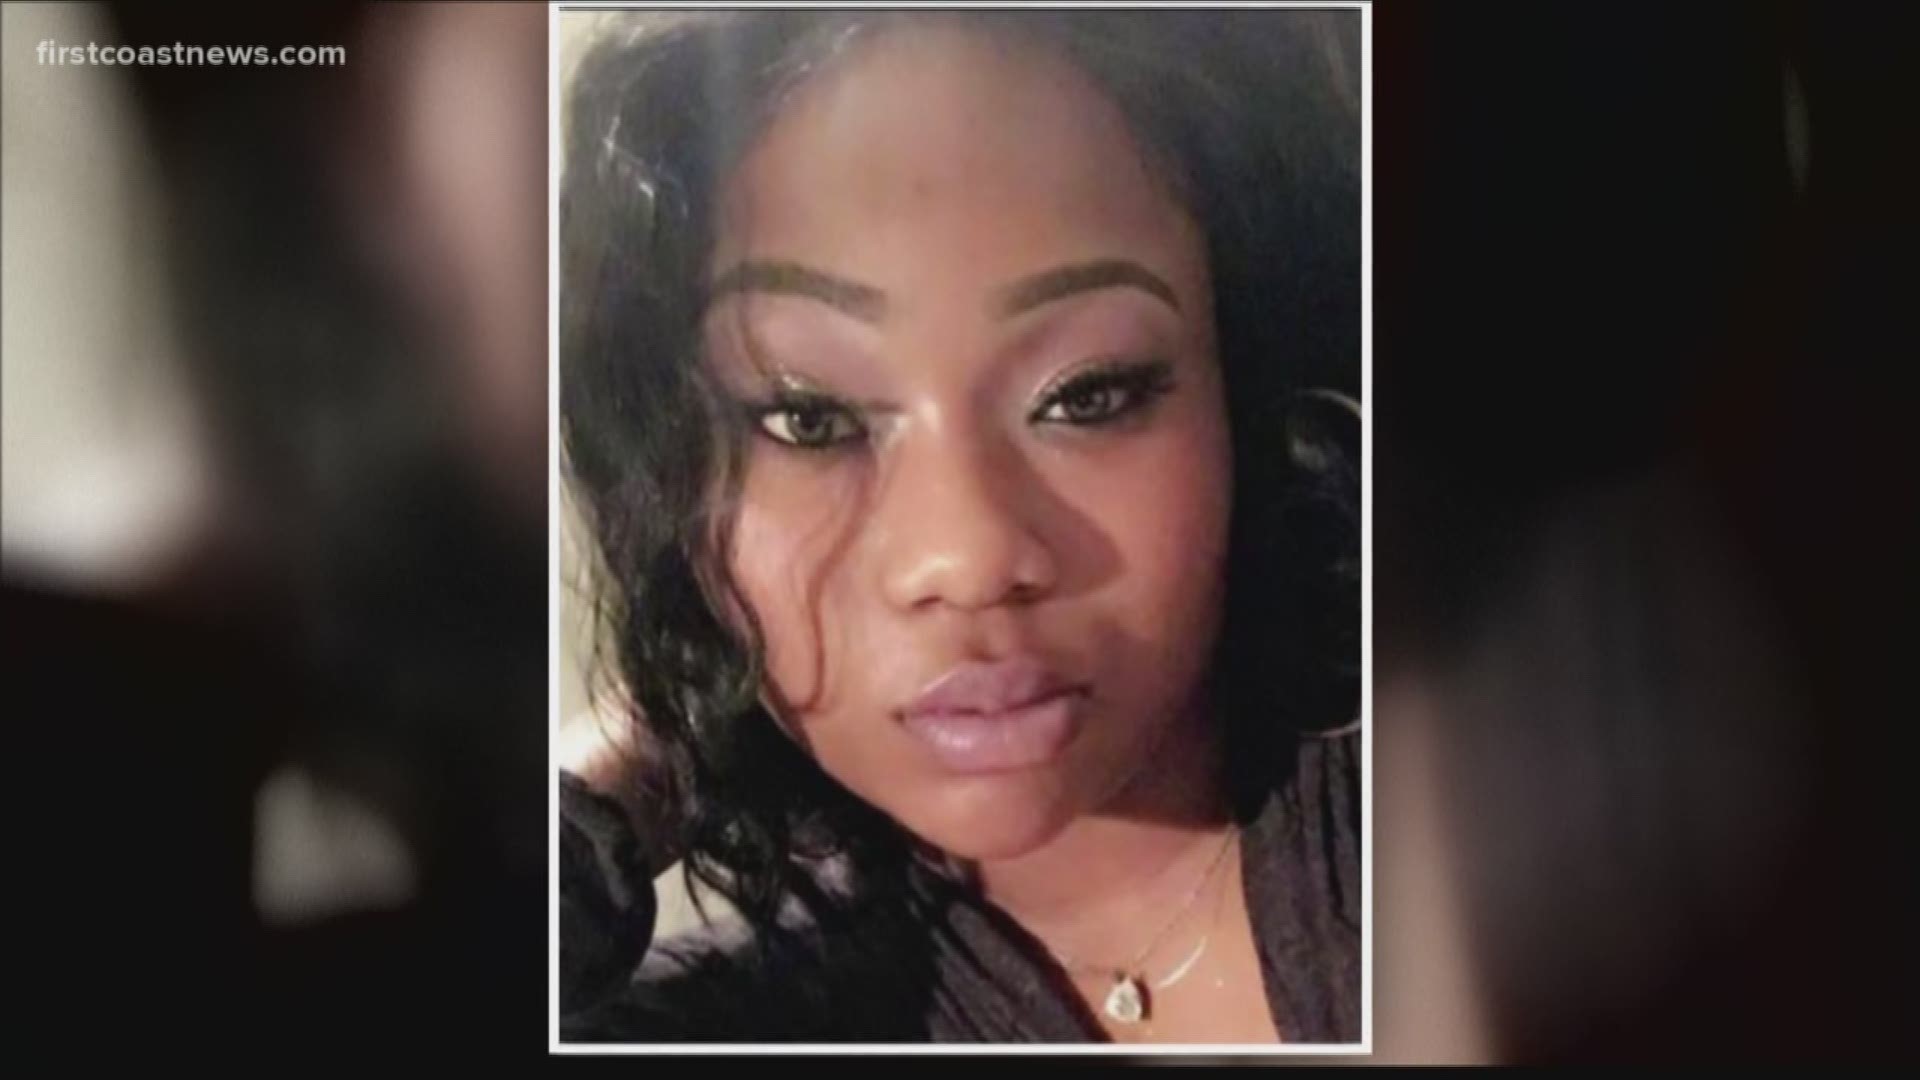 Paulesha Gibson had just turned 25 when she broke her ankle exercising with a friend in a Jacksonville park in July 2018.